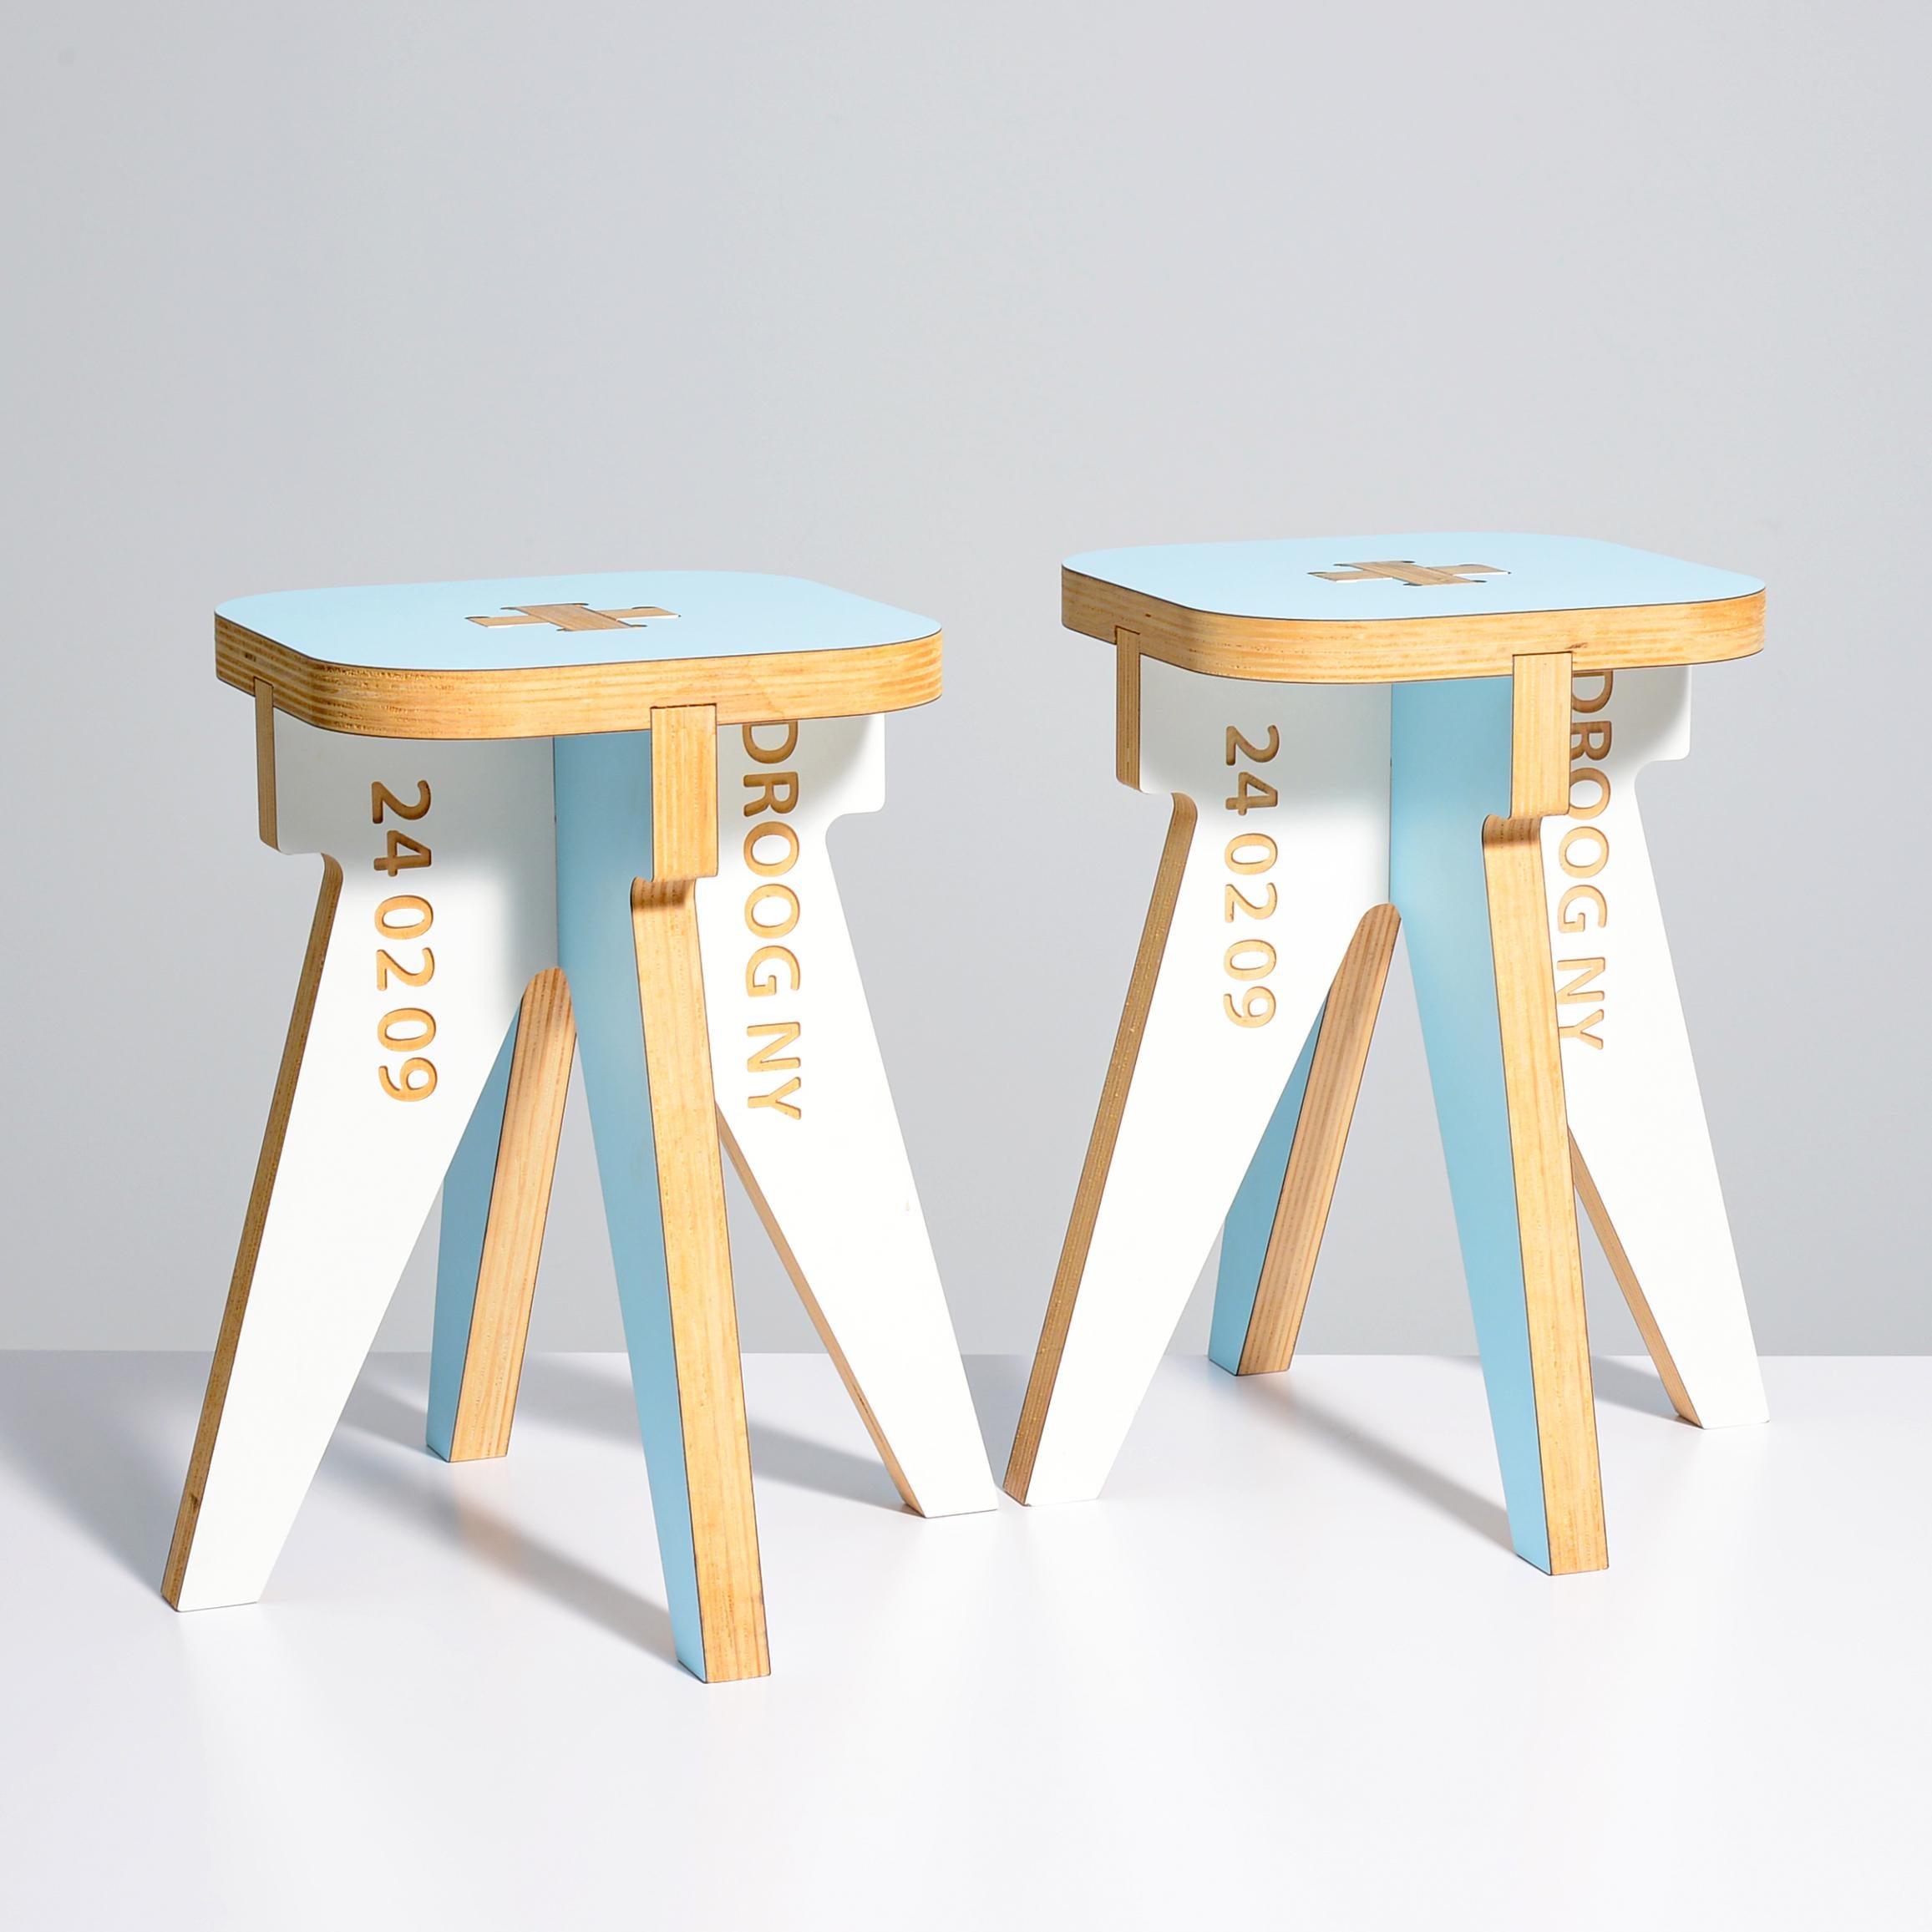 Artist/Designer: Jurgen Bey (Dutch, b. 1965); Droog Design

Additional Information: The stools were produced in 2009 for Droog’s first USA retail gallery in New York.

Marking(s); notes: laser cut manufacturer’s mark to each “Droog NY, 24 02